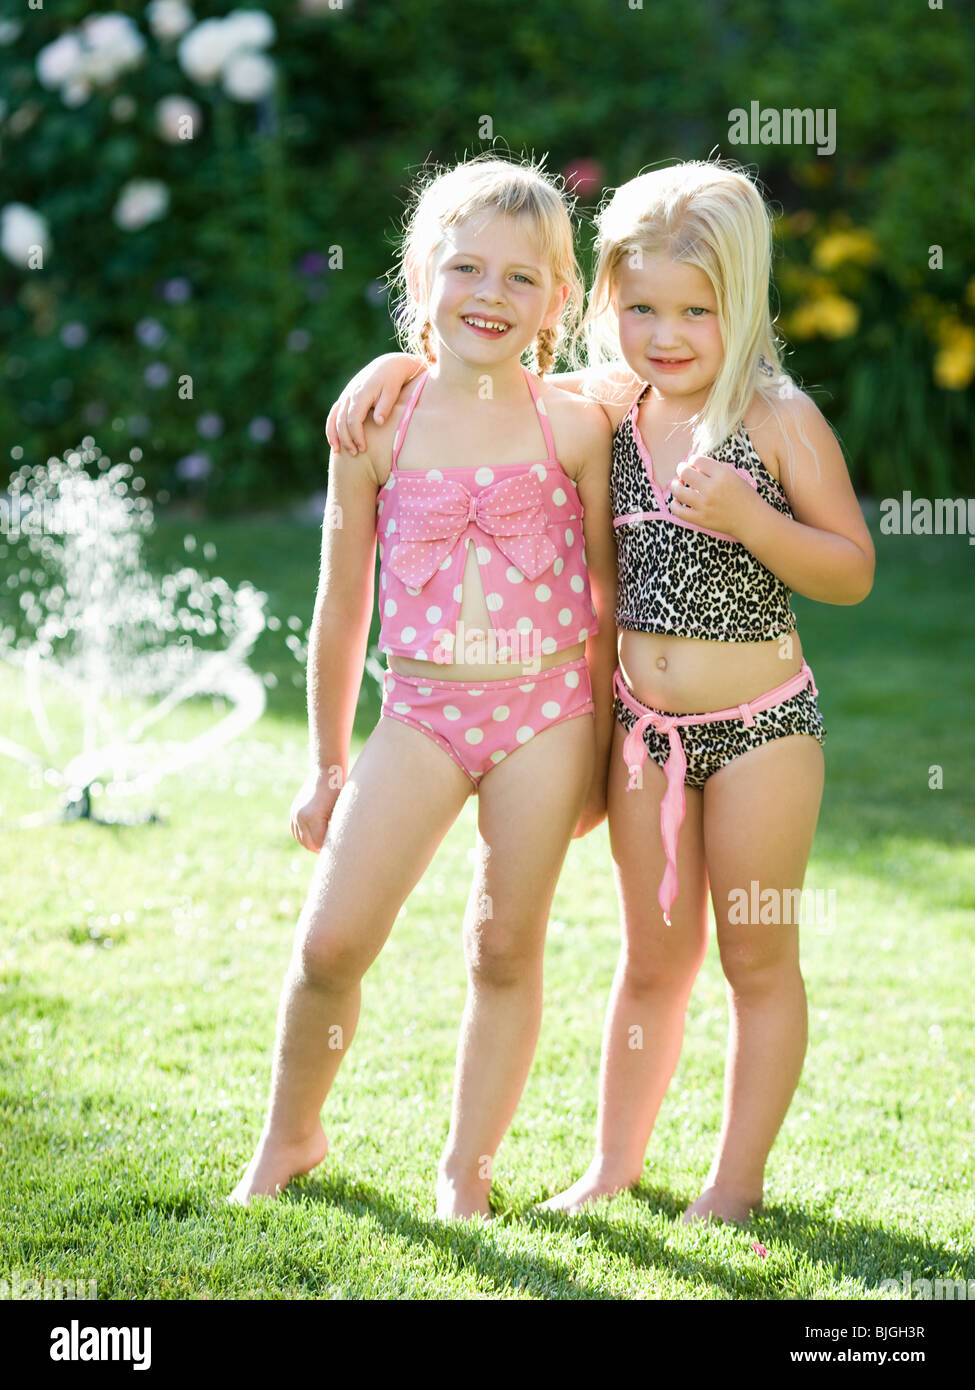 Little Girls In Swimsuits High Resolution Stock Photography and Images -  Alamy